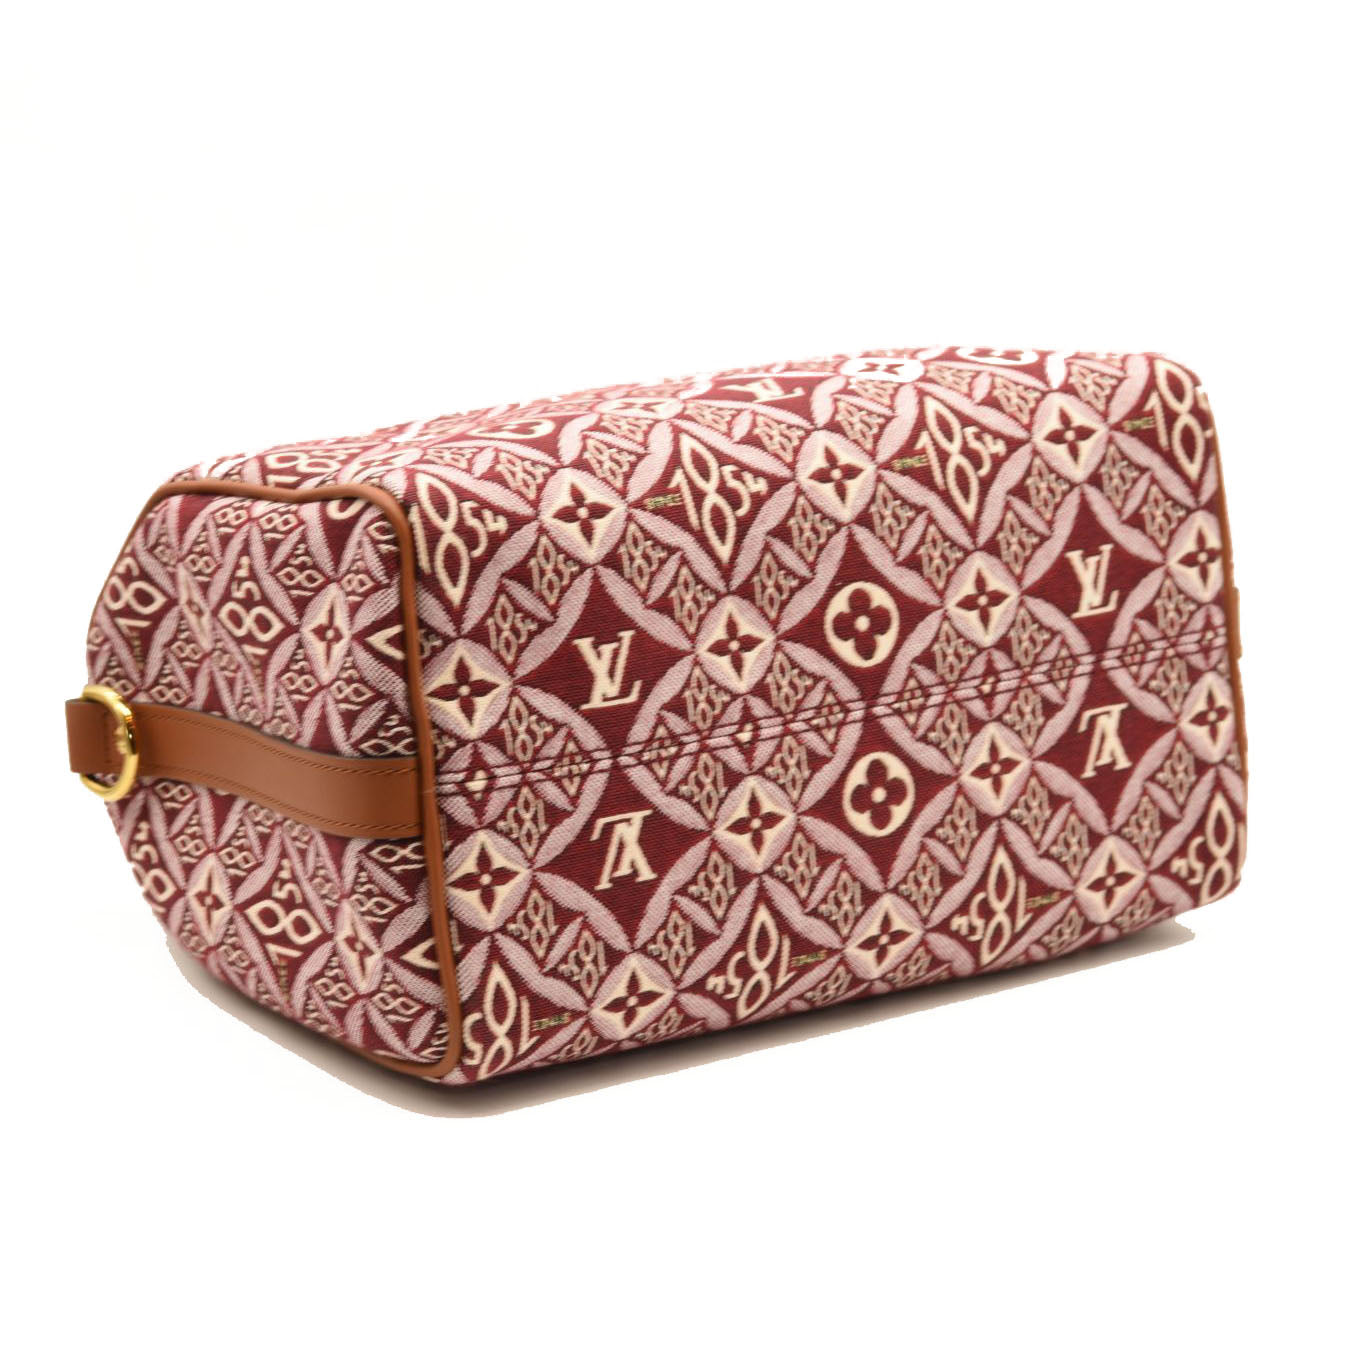 Products by Louis Vuitton: Toiletry Bag 25  Bags, Louis vuitton, Louis  vuitton luggage